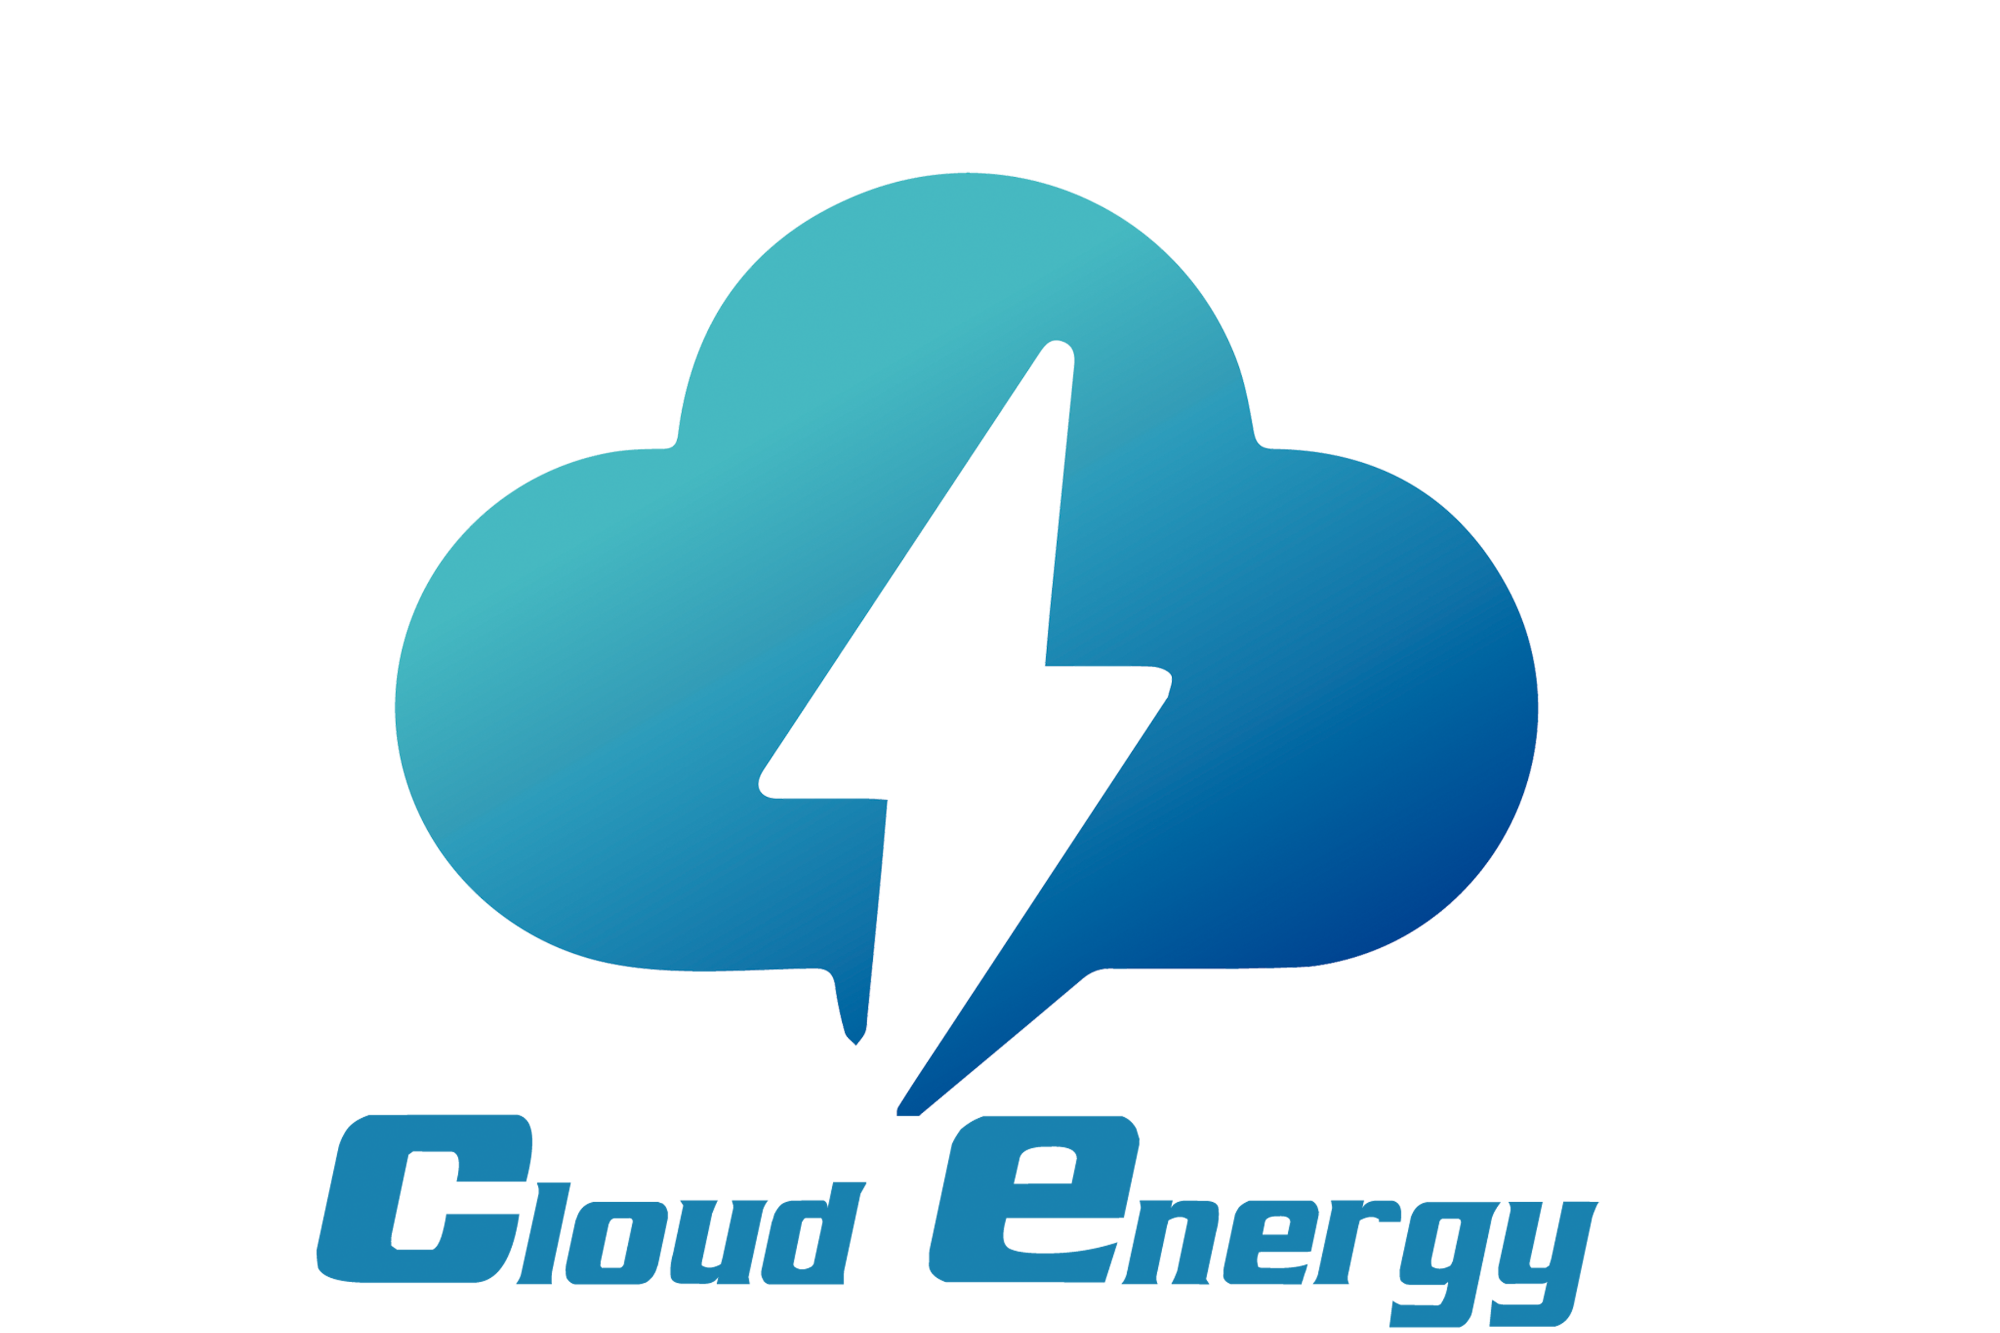 Cloud Energy was founded